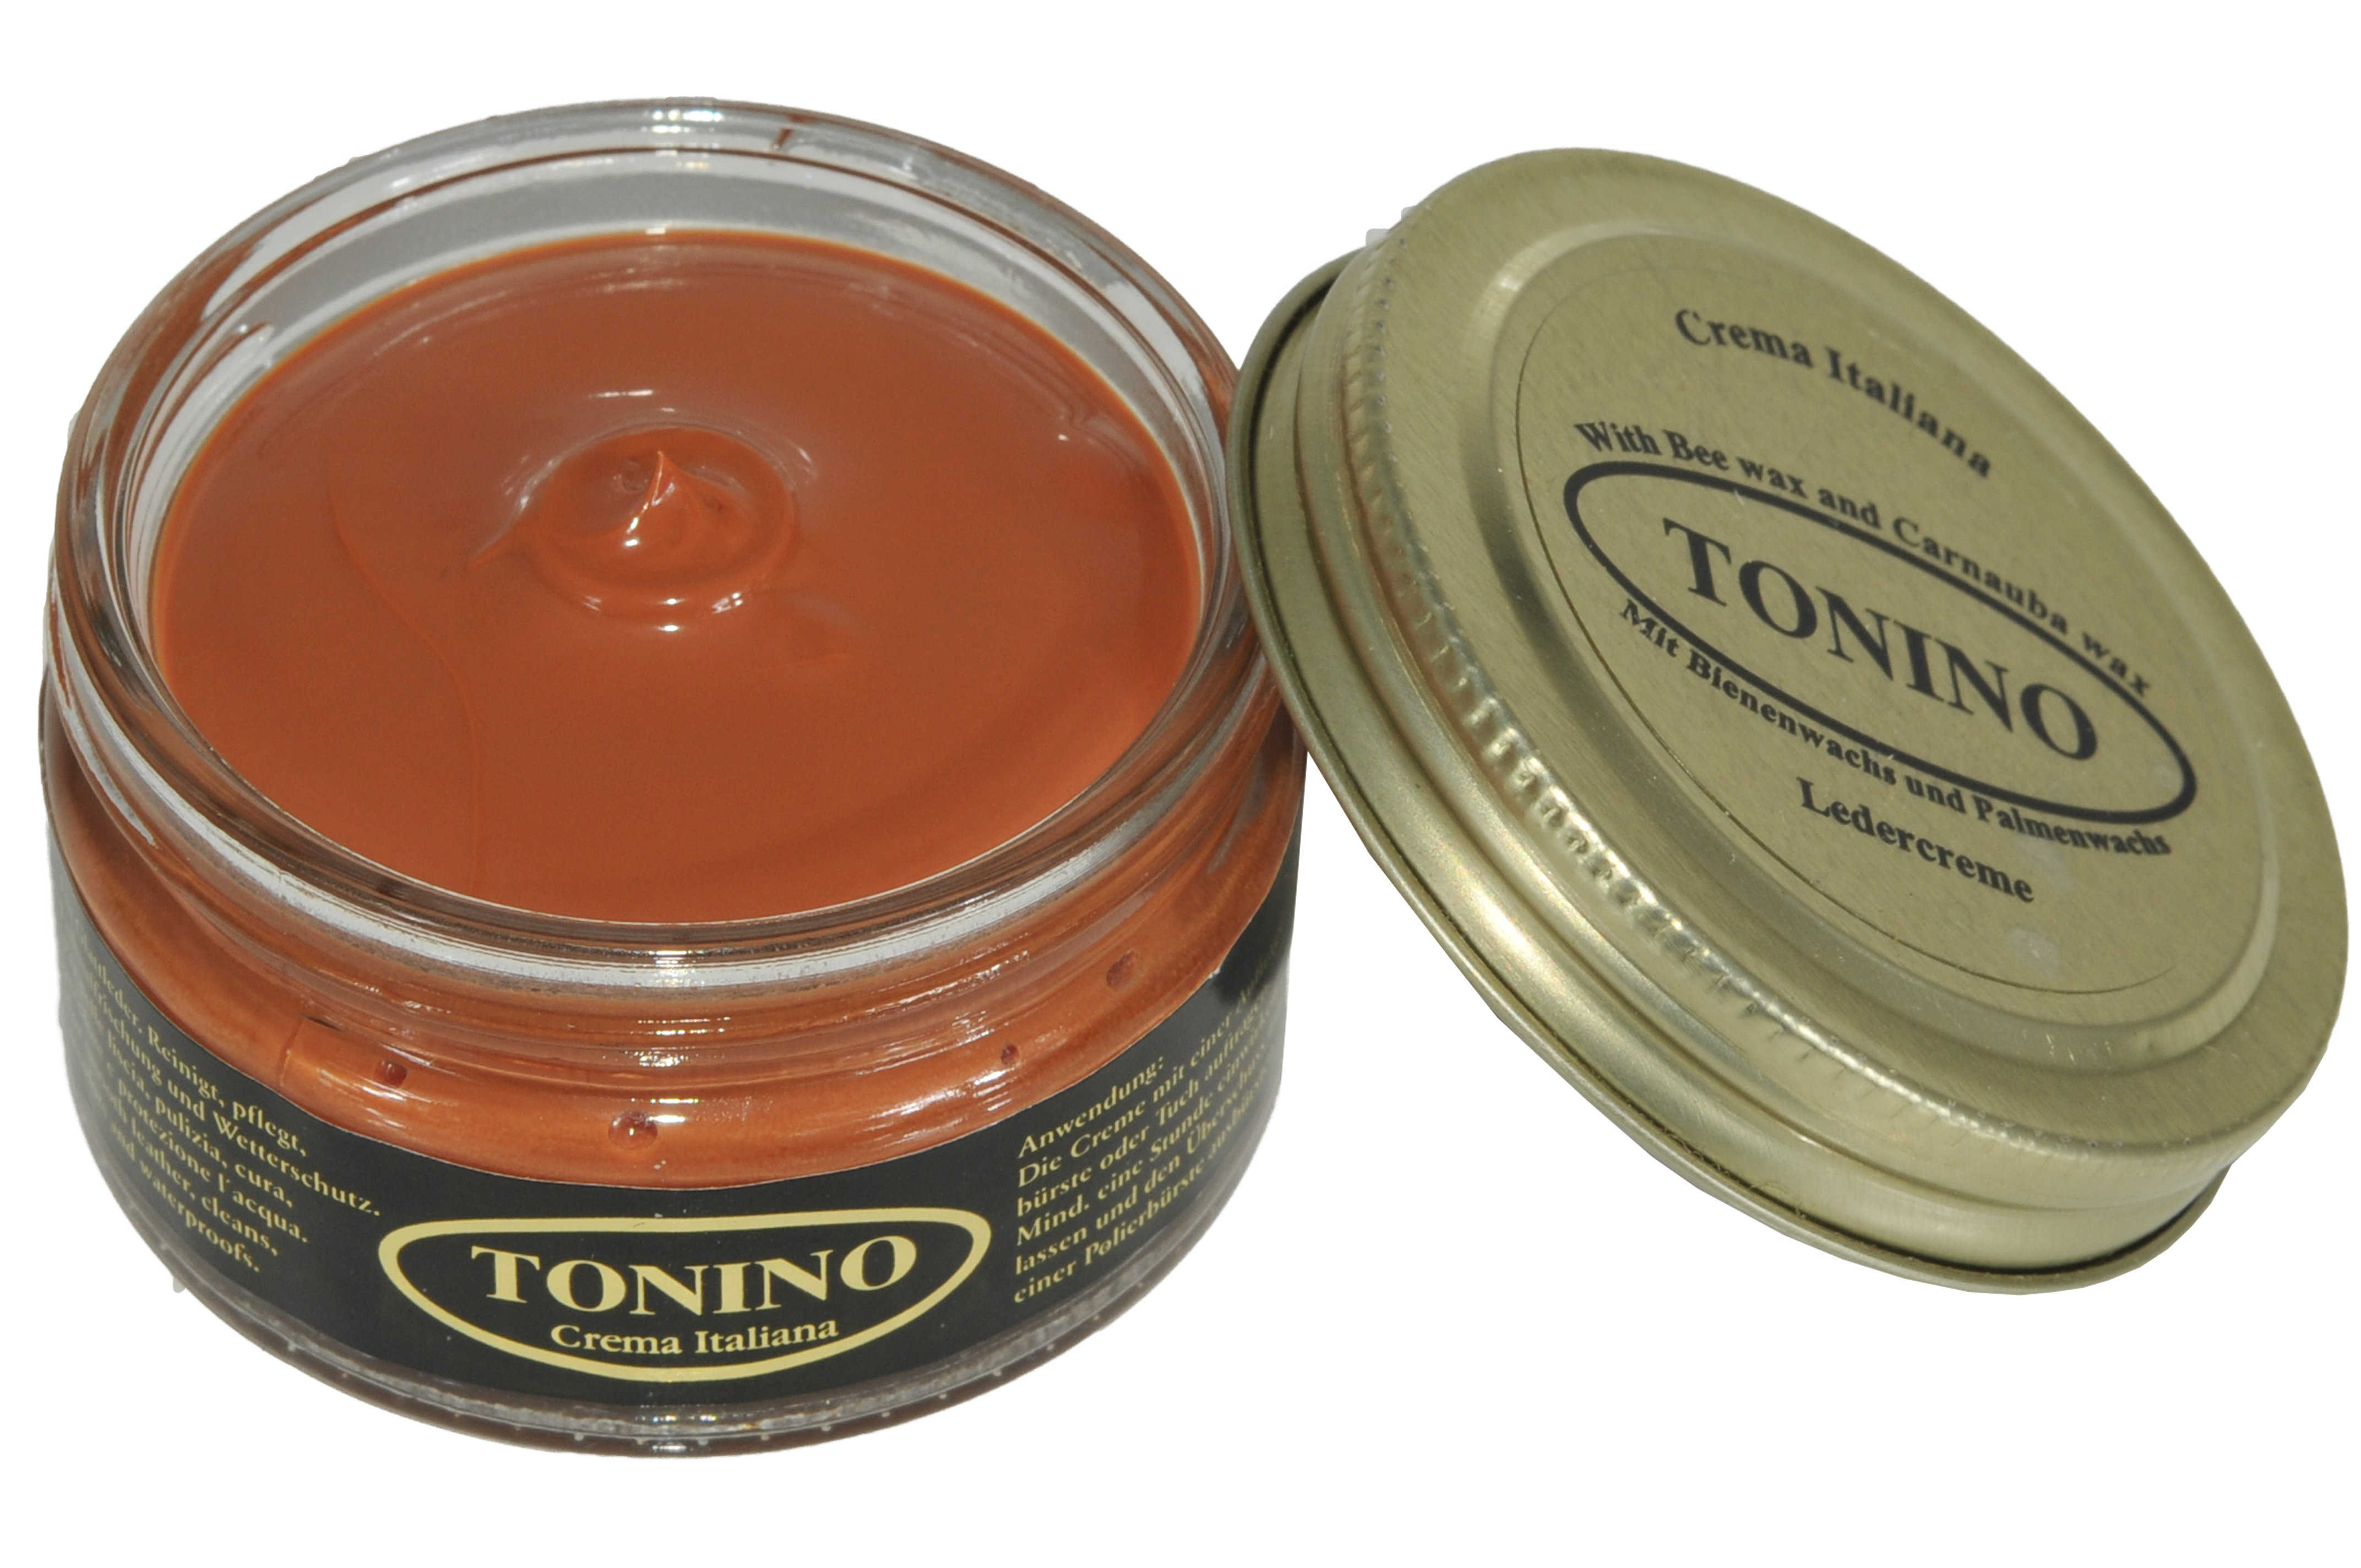 Light Brown Tonino leather cream in the glass. Care + protection.